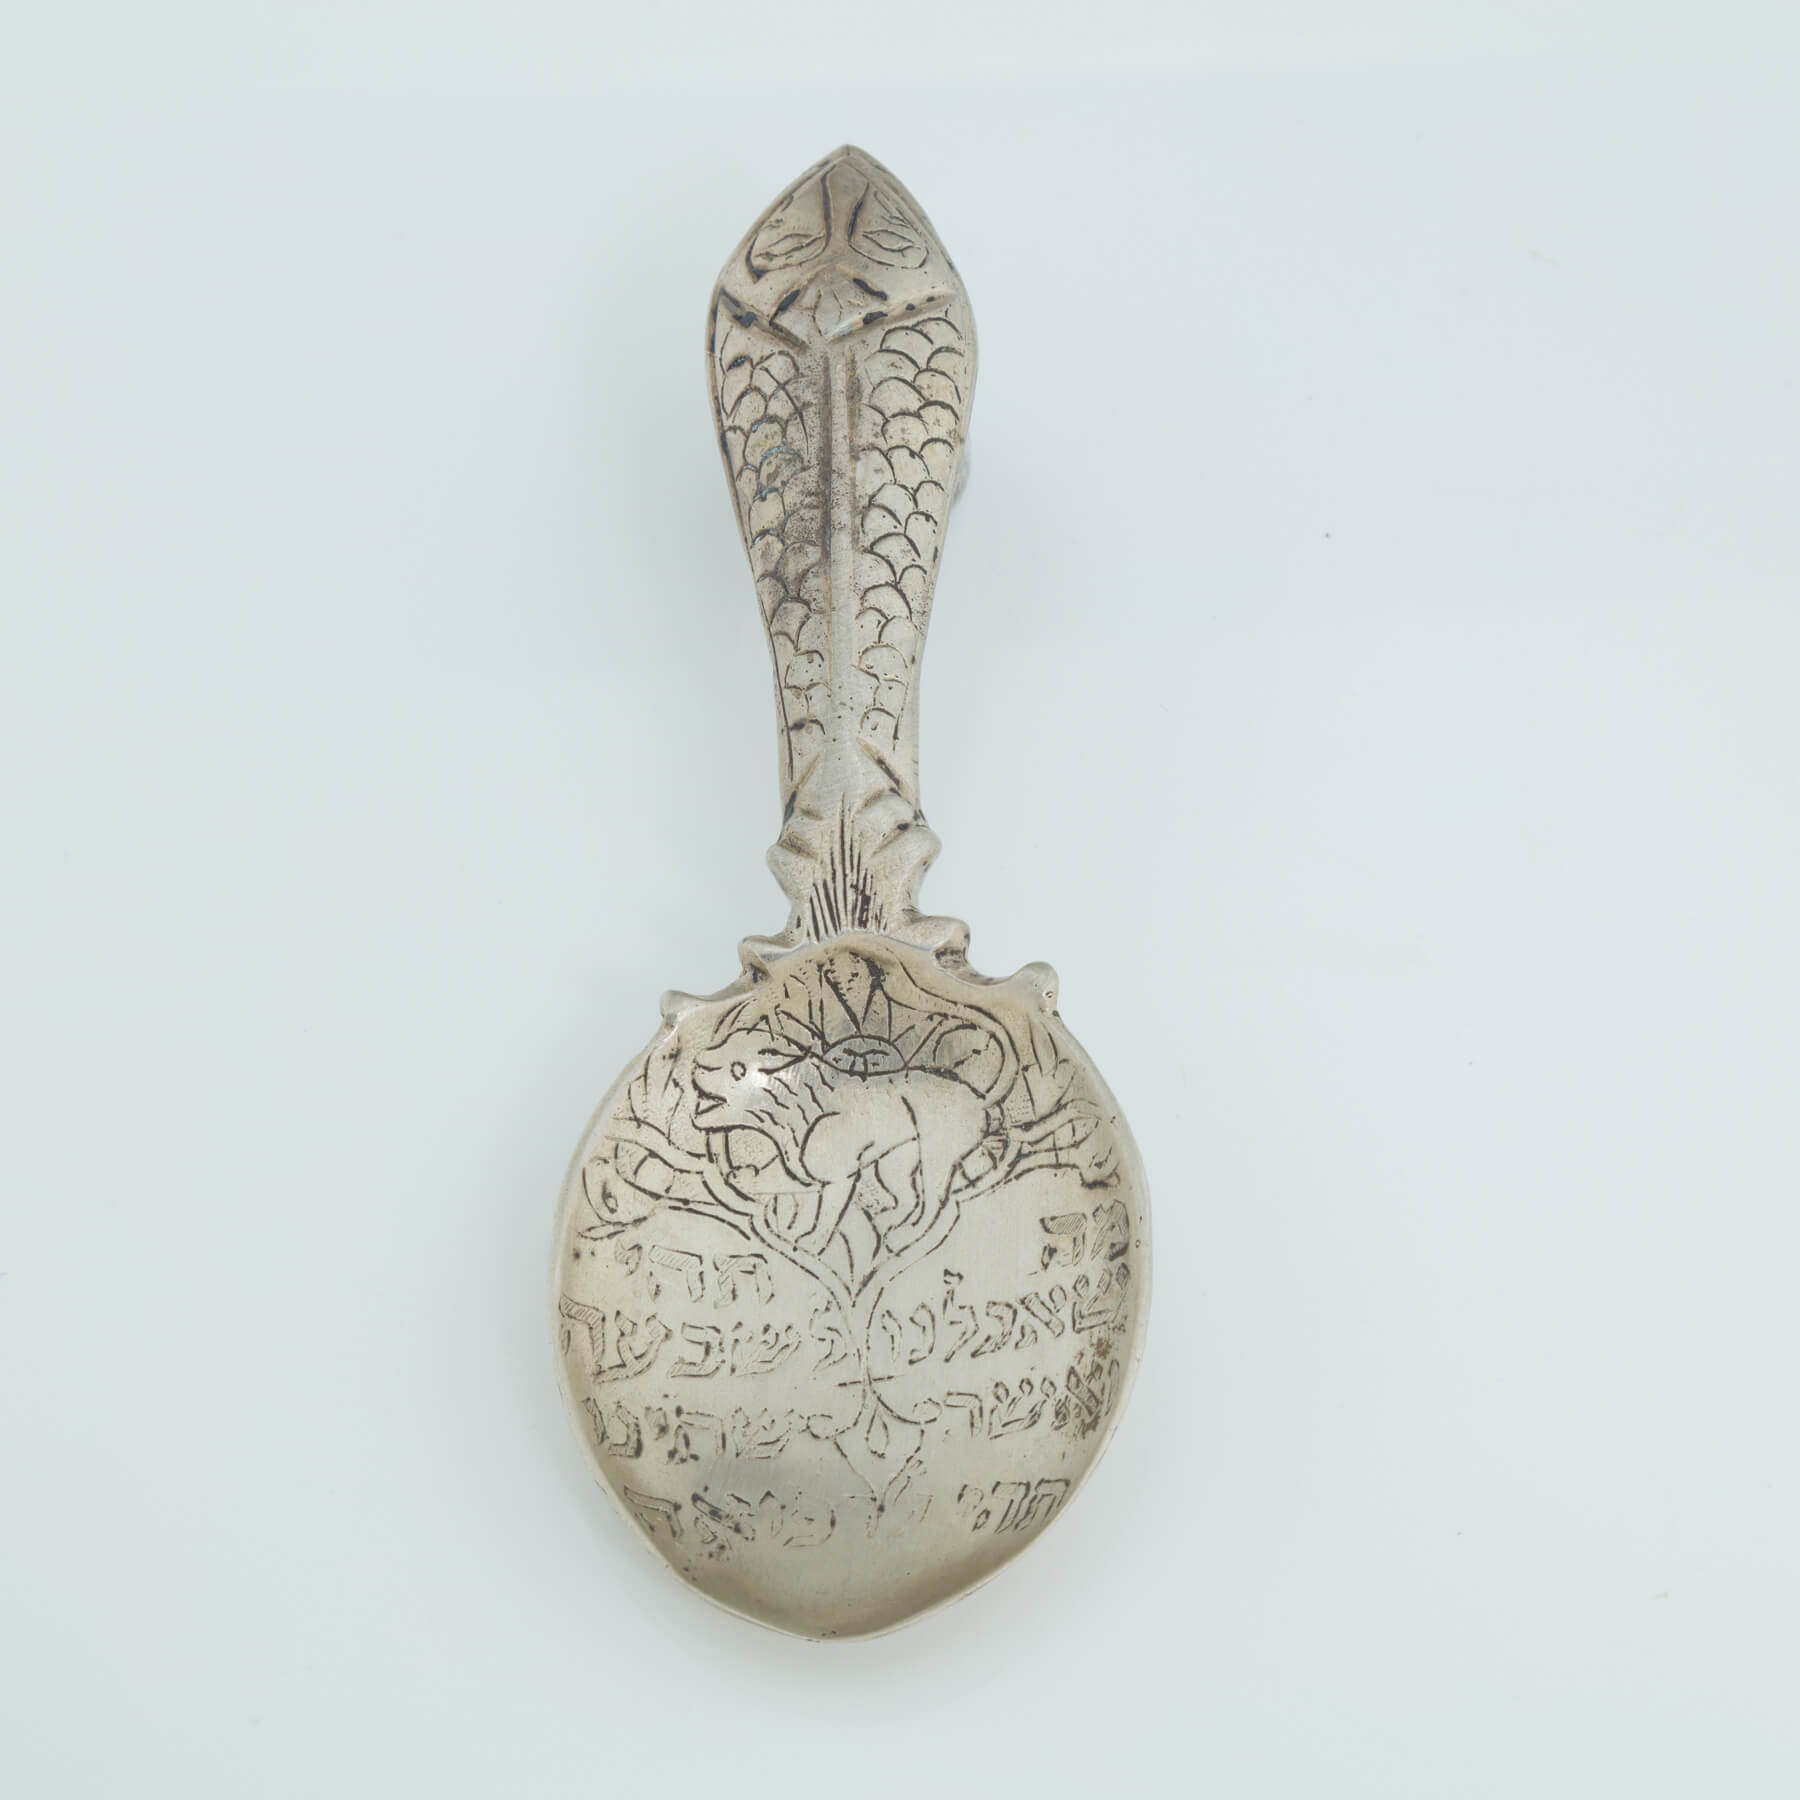 005. An Amuletic Silver Spoon